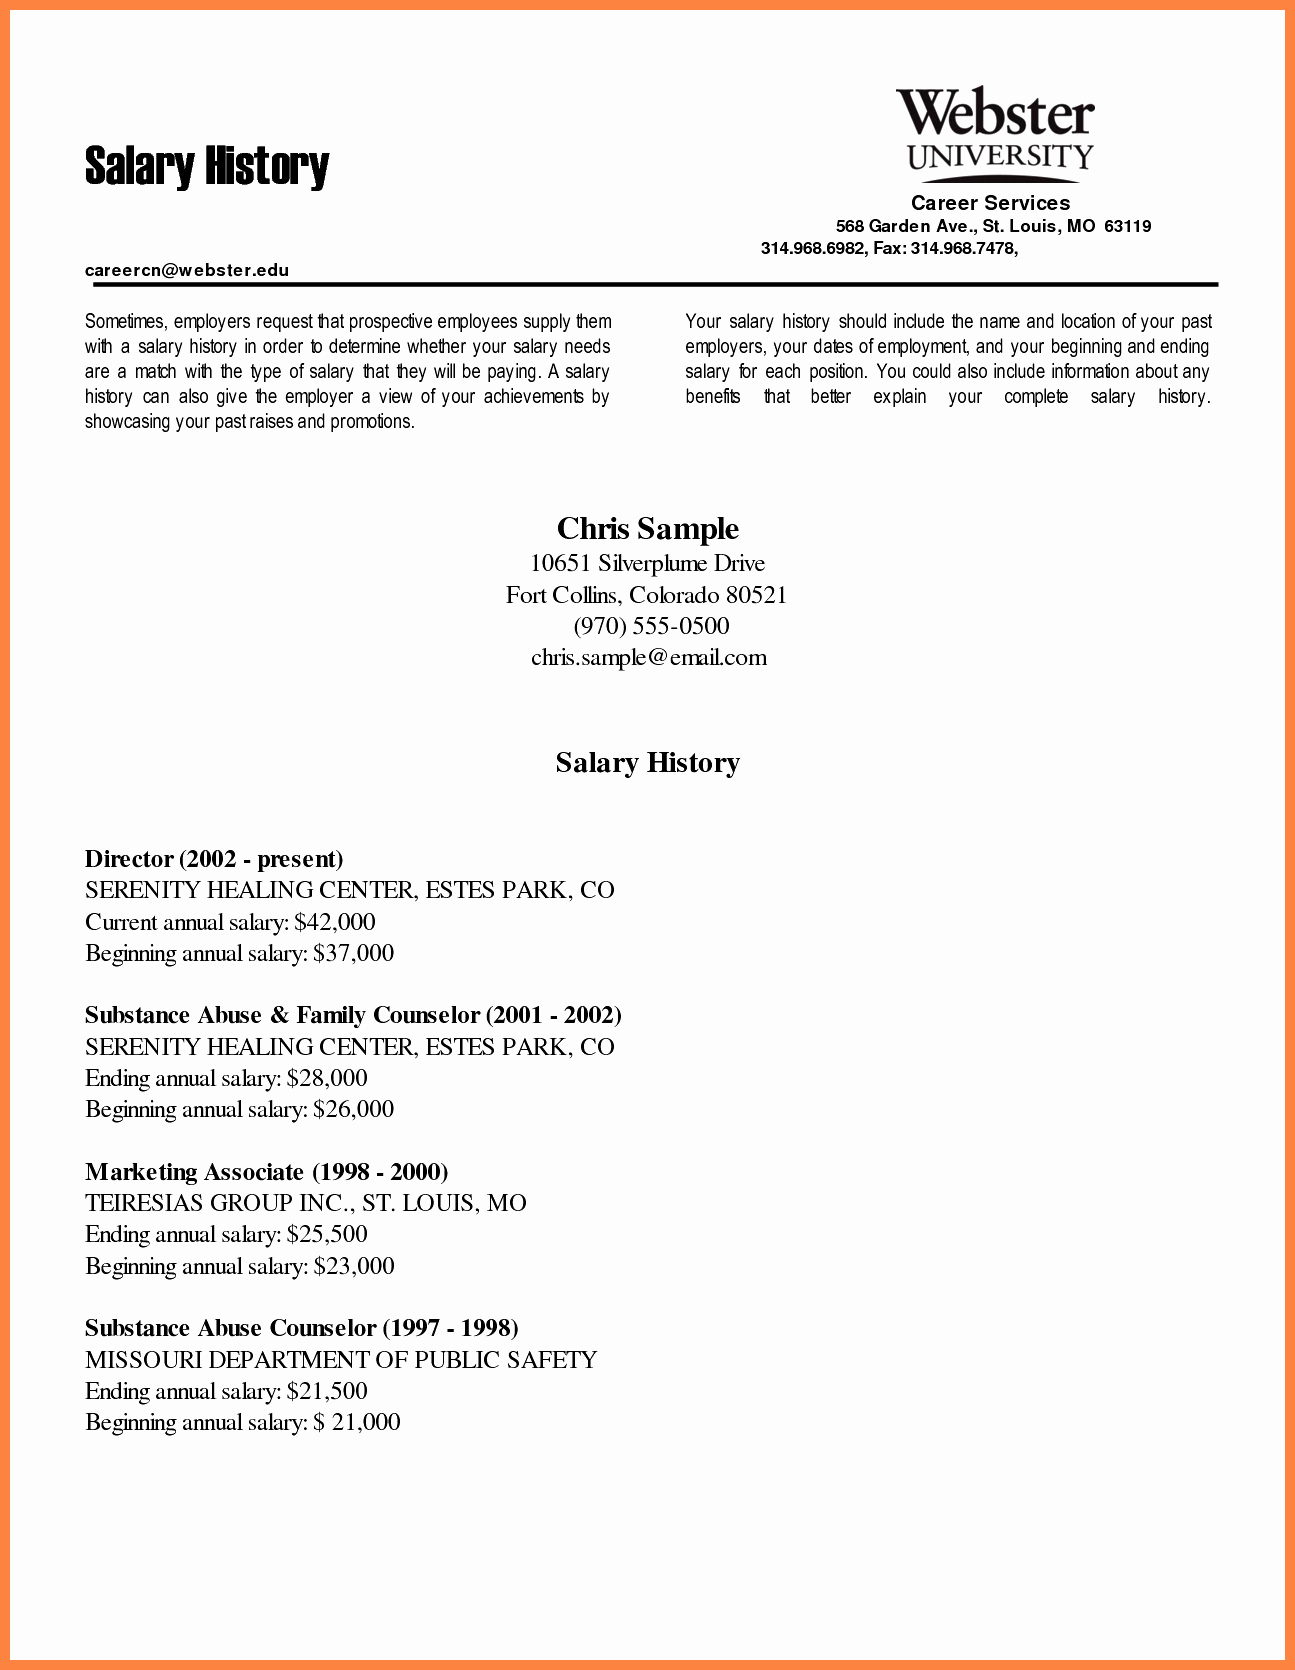 Sample Of Salary Requirements Letter Beautiful 5 Cover Letter with Salary History Example